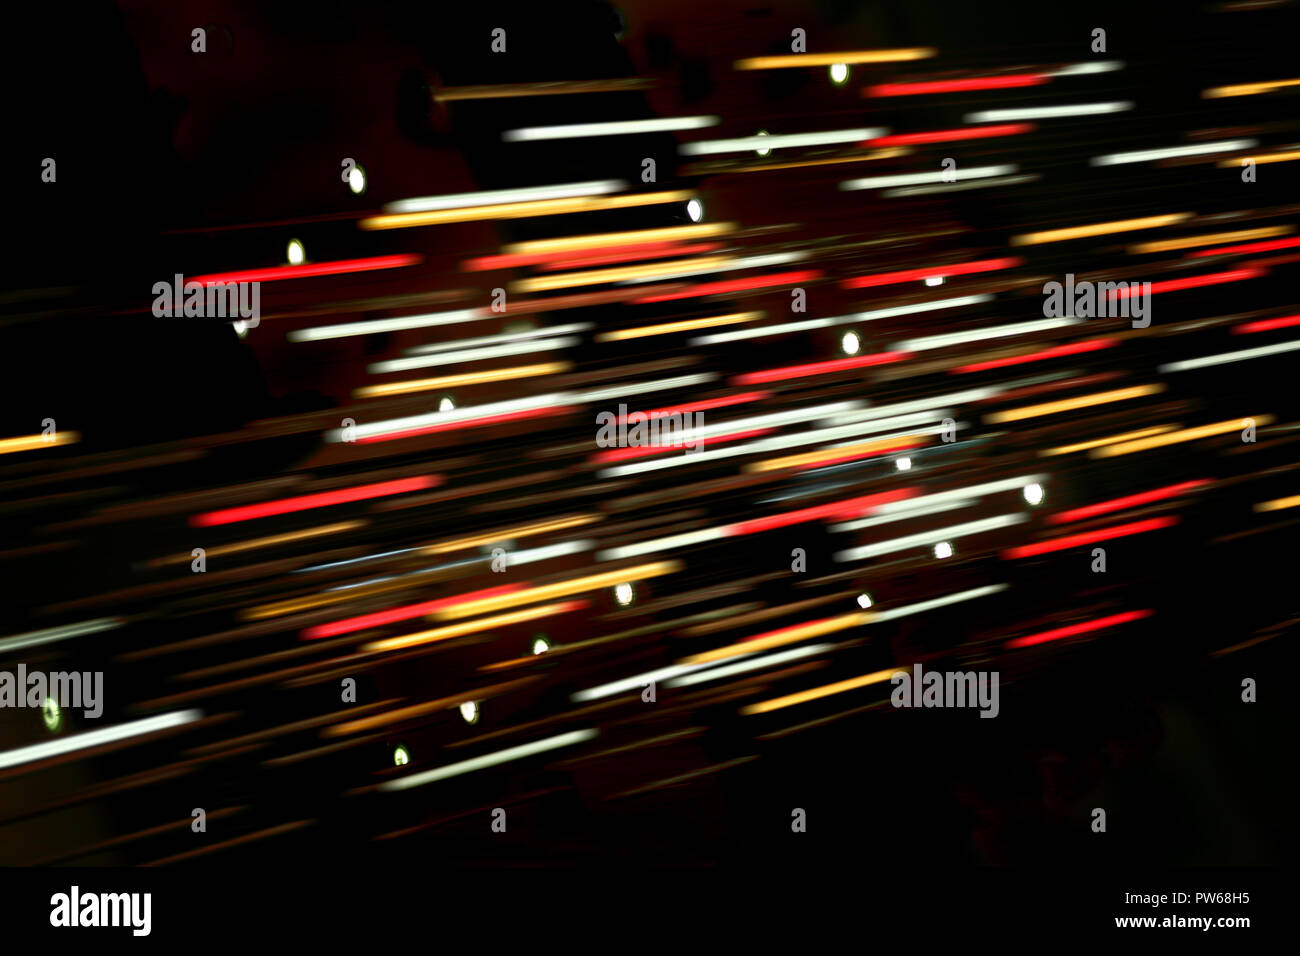 Colored blurred lines of light on dark background Stock Photo